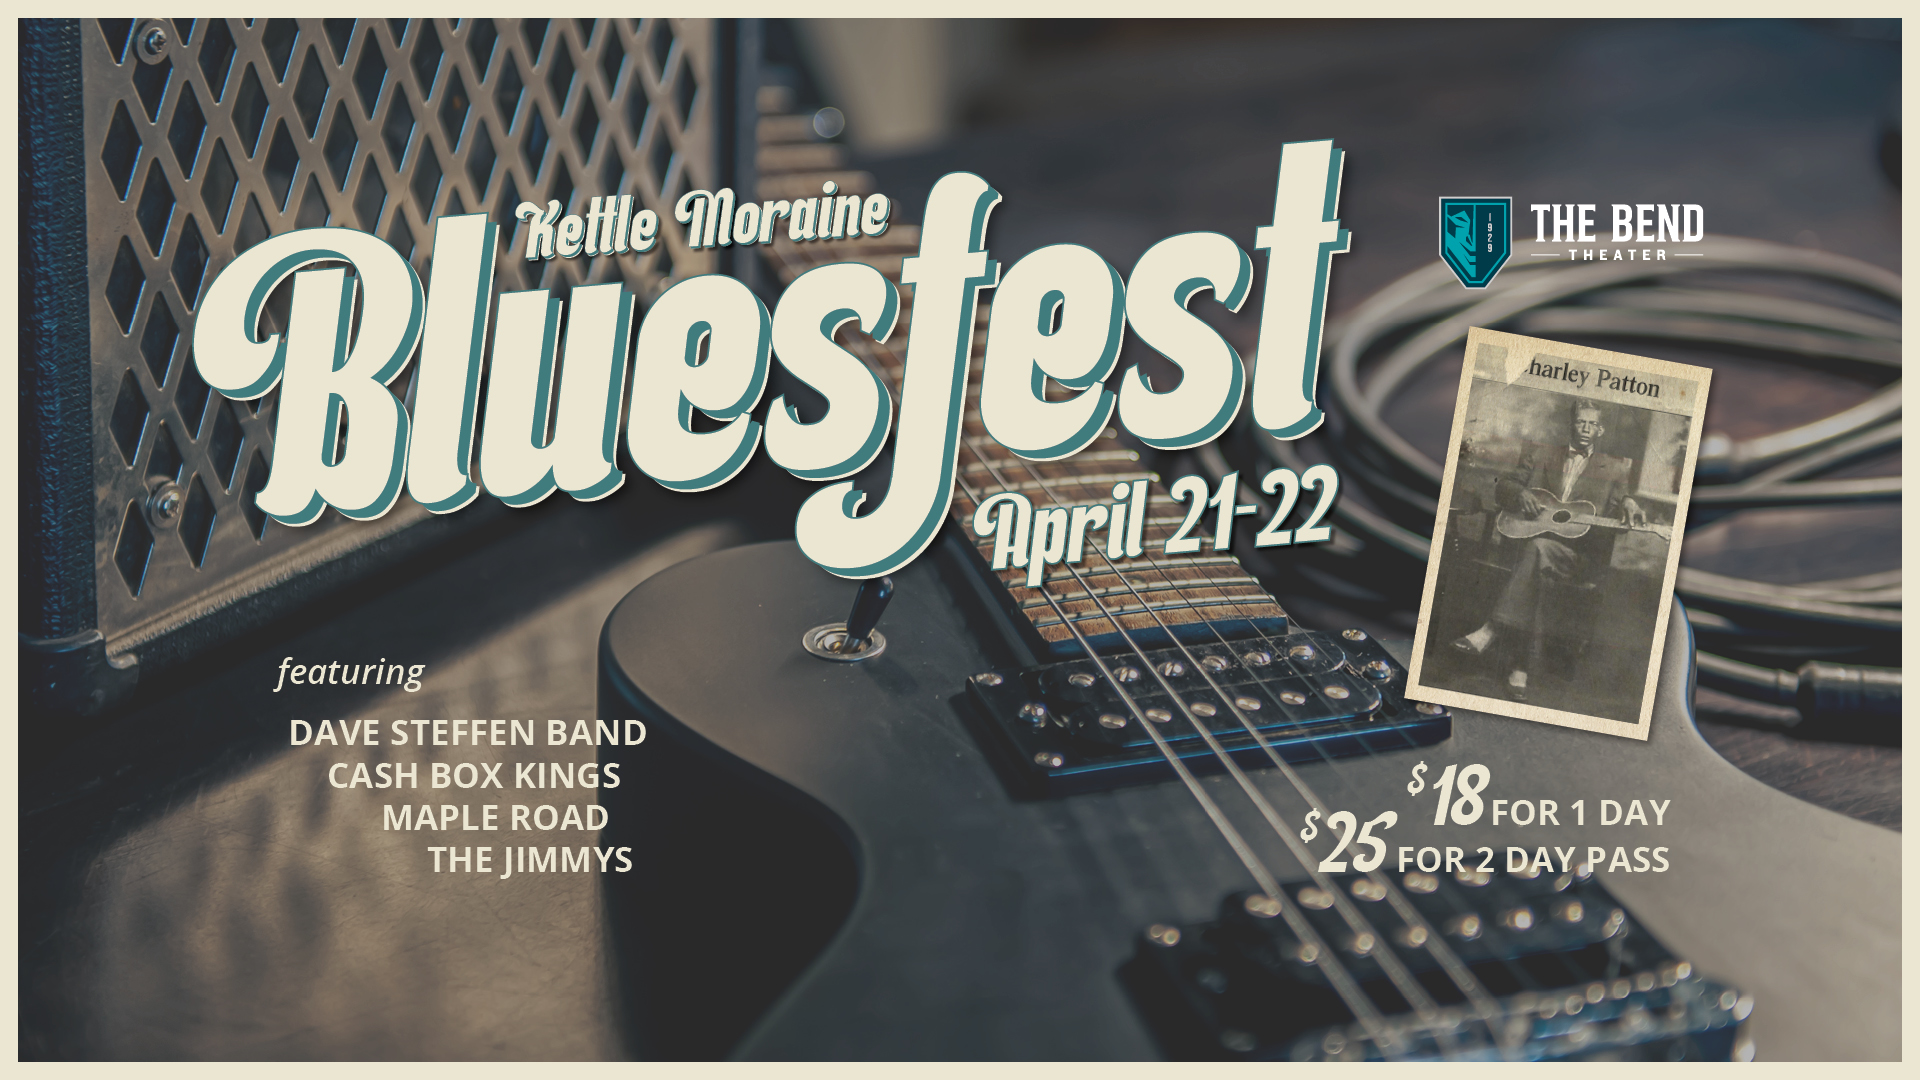 Kettle Moraine Bluesfest - Live Music at The Bend Theater